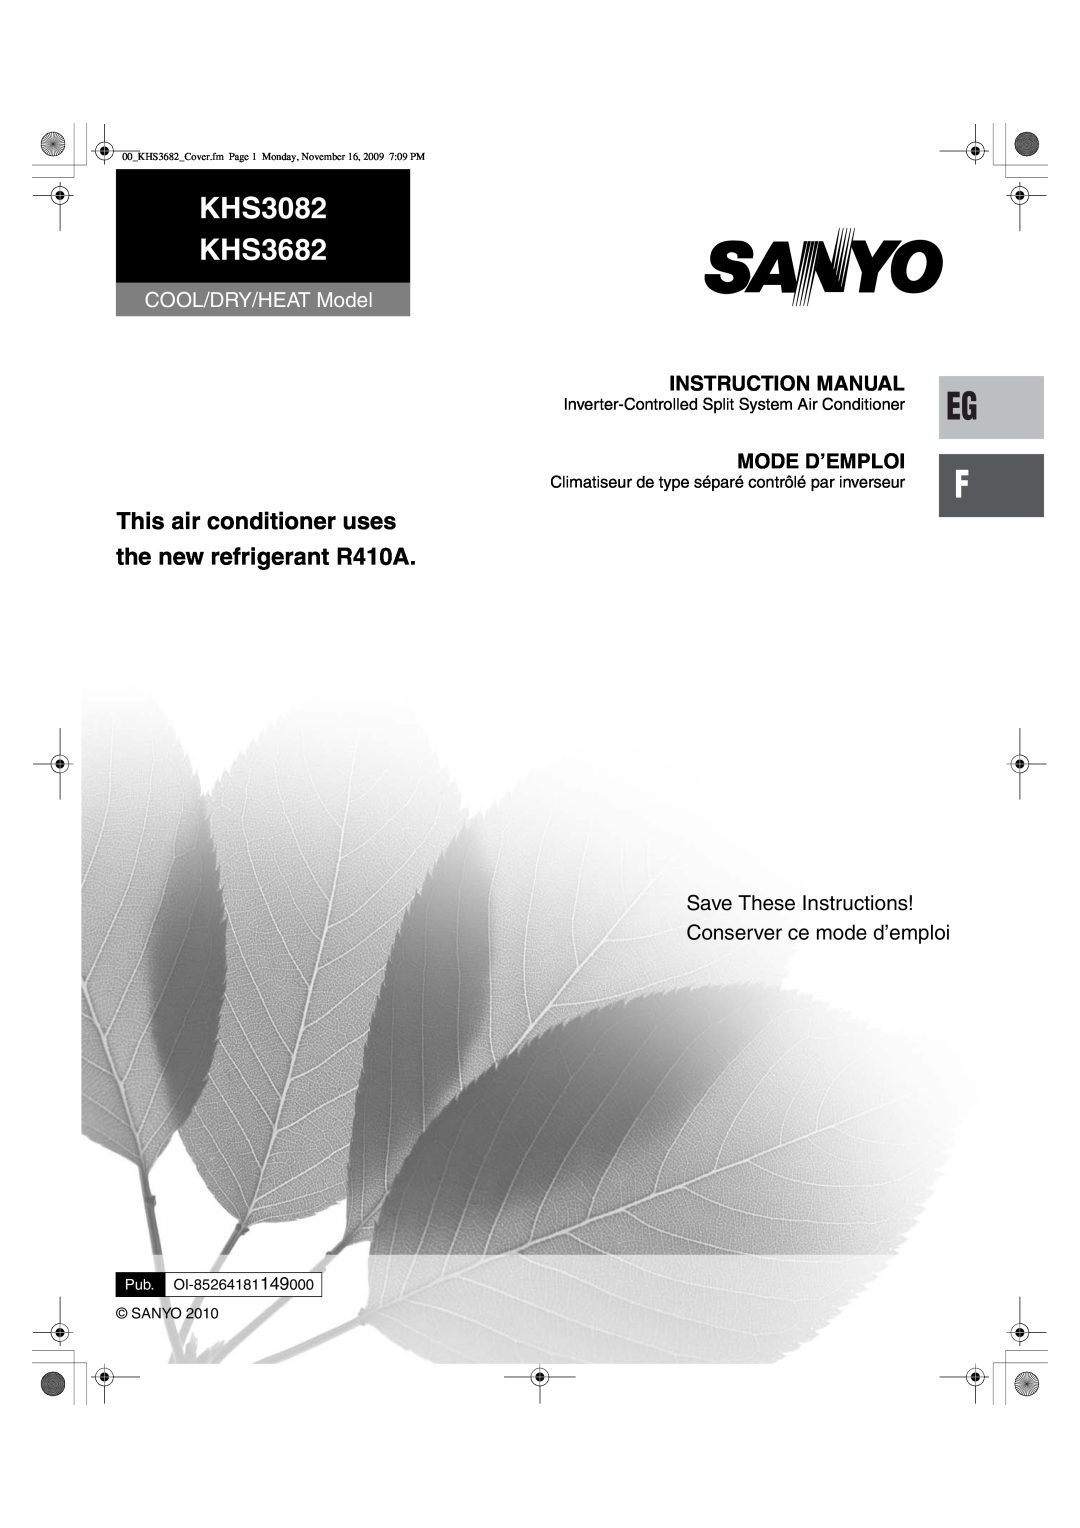 Sanyo instruction manual Mode D’Emploi, KHS3082 KHS3682, This air conditioner uses, the new refrigerant R410A 